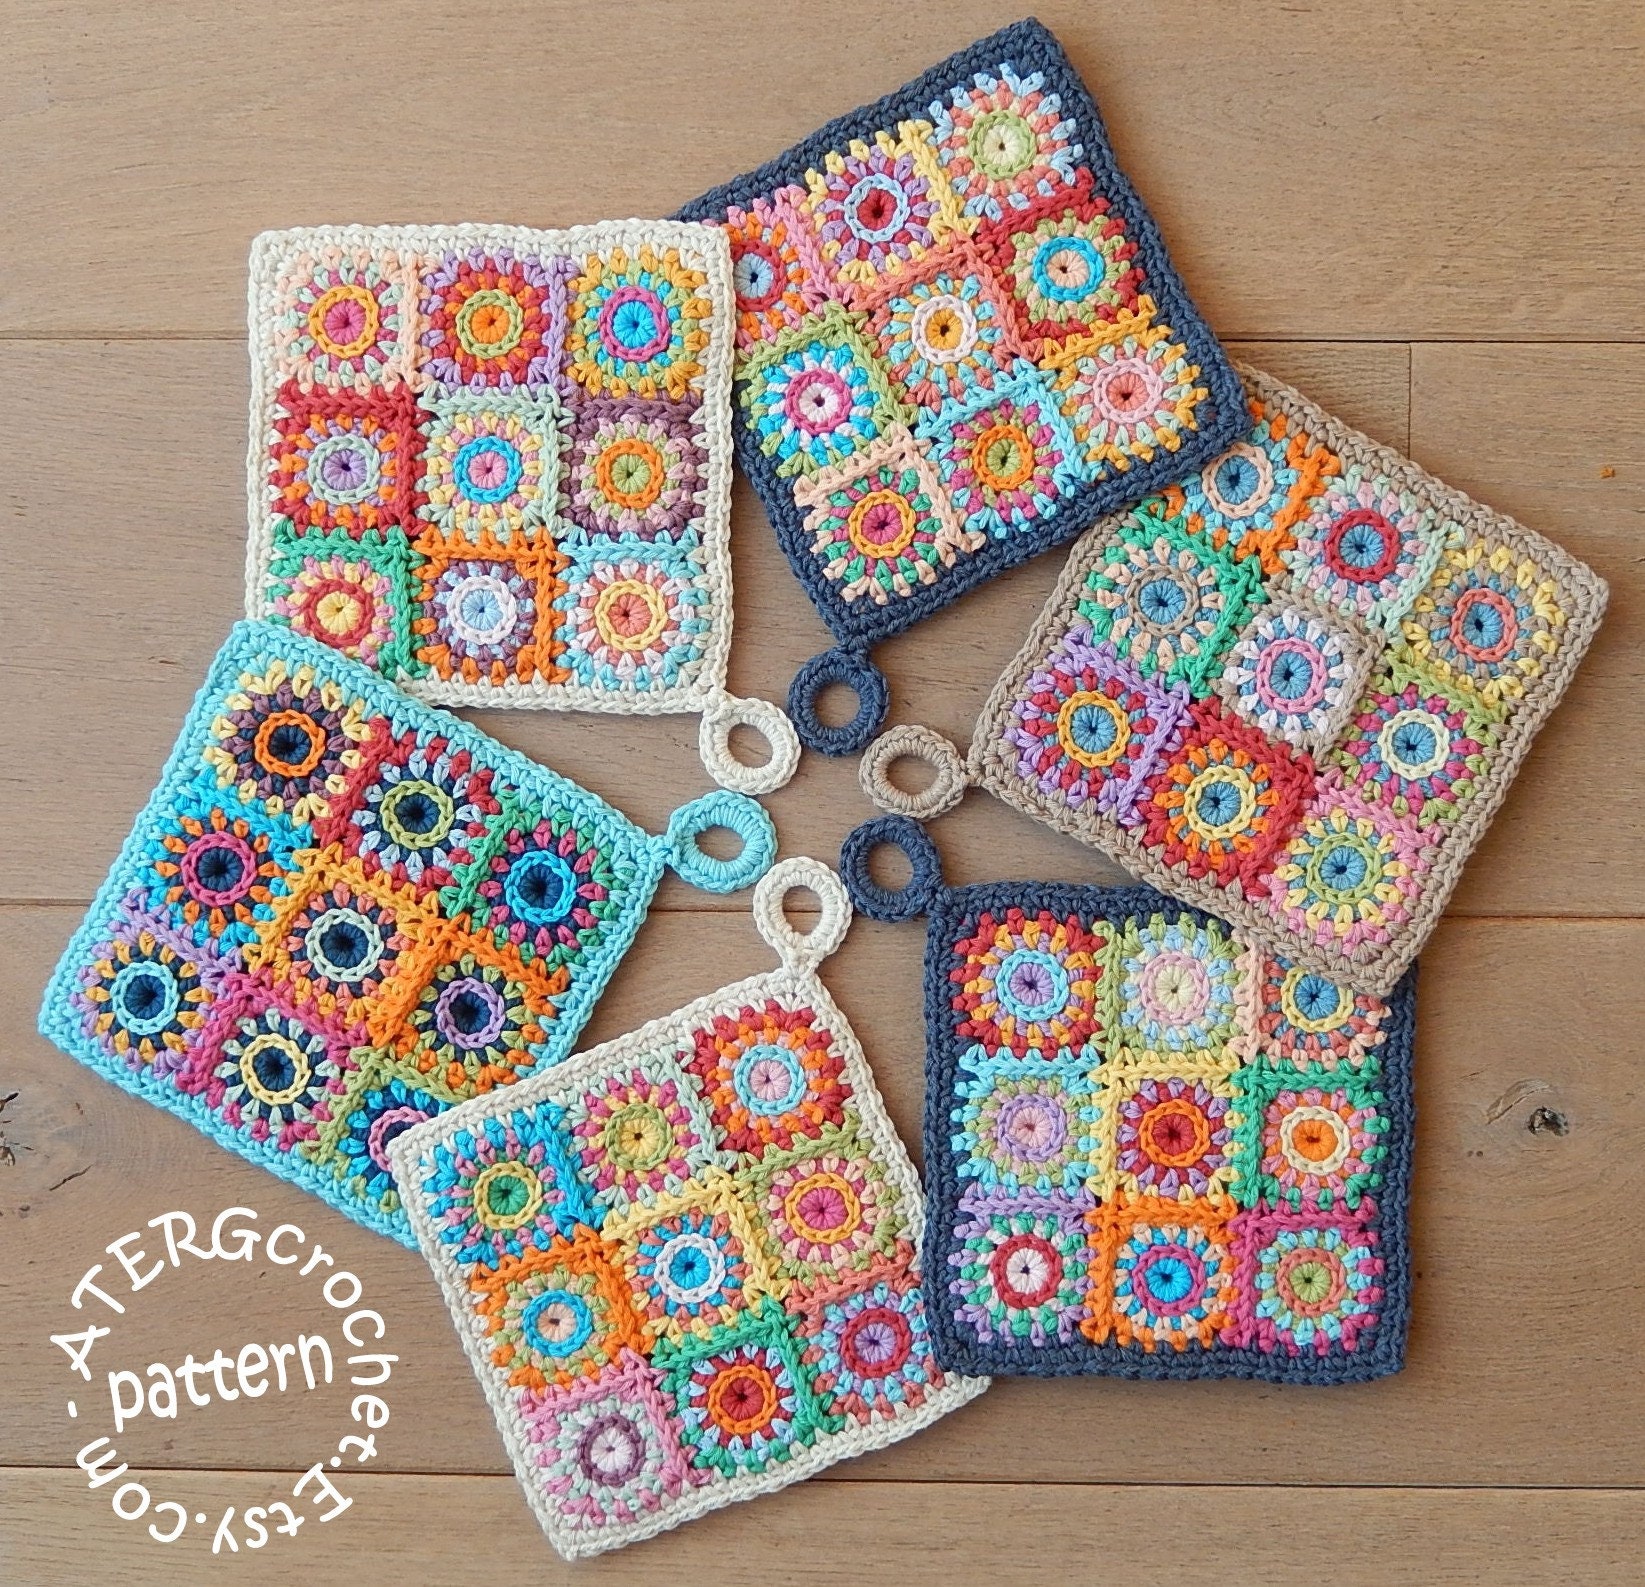 Handmade Potholders from the Flower City Pattern Testers